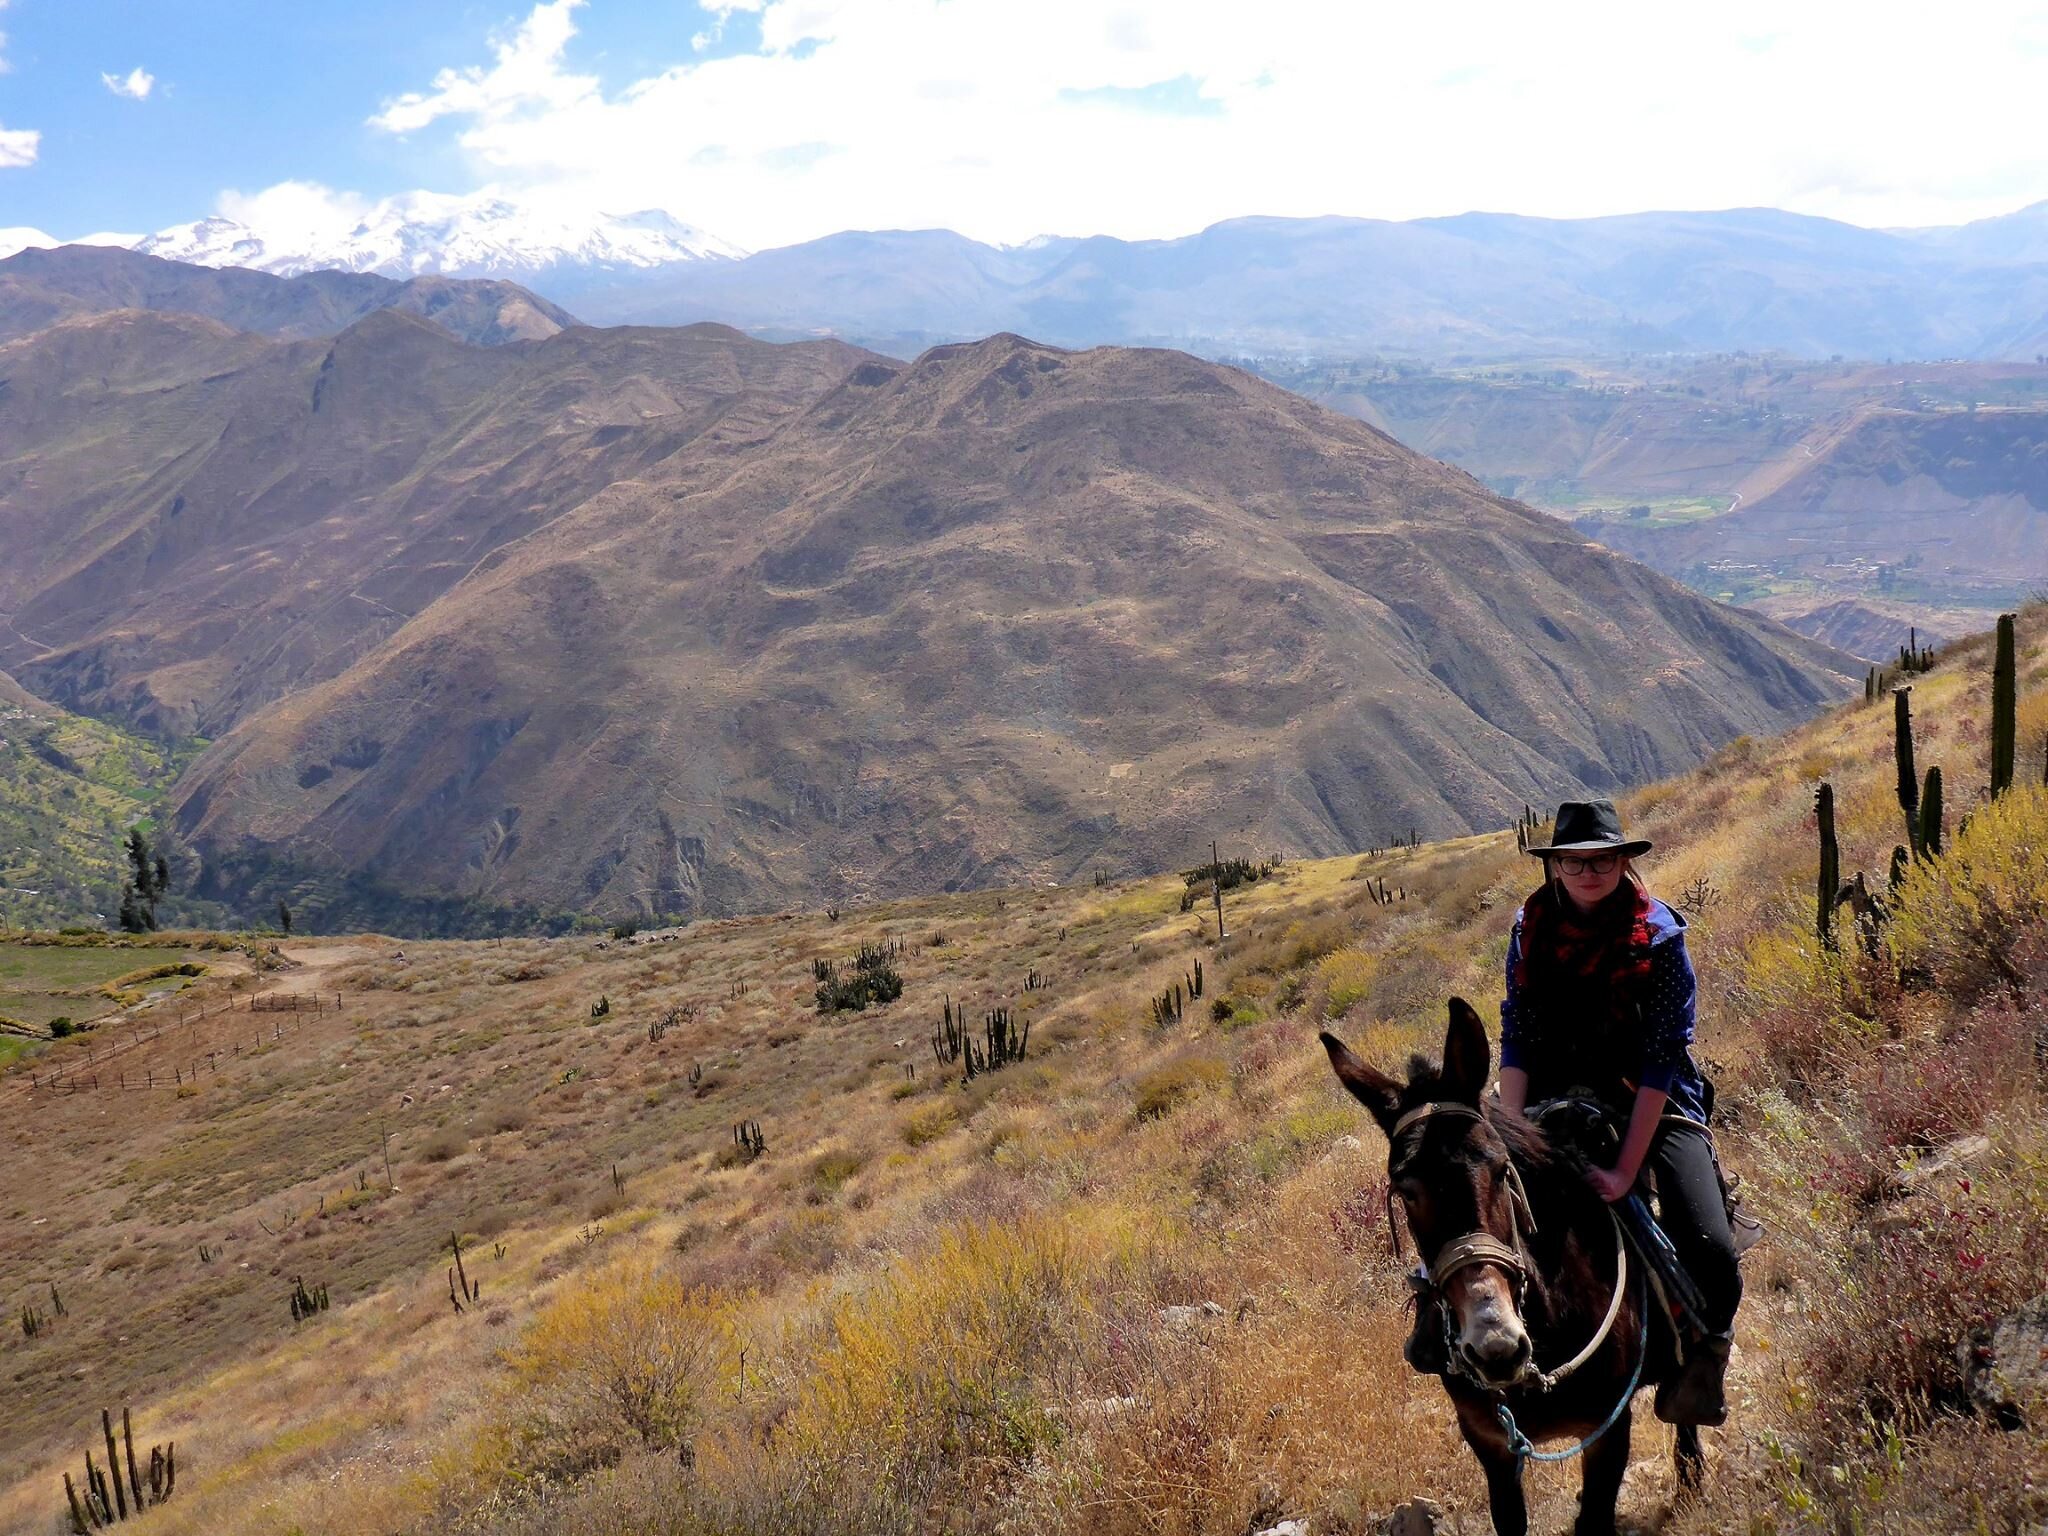 Traveling on a donkey and chewing coca leaves.  A Polish bioarchaeologist conducts extraordinary research in Peru